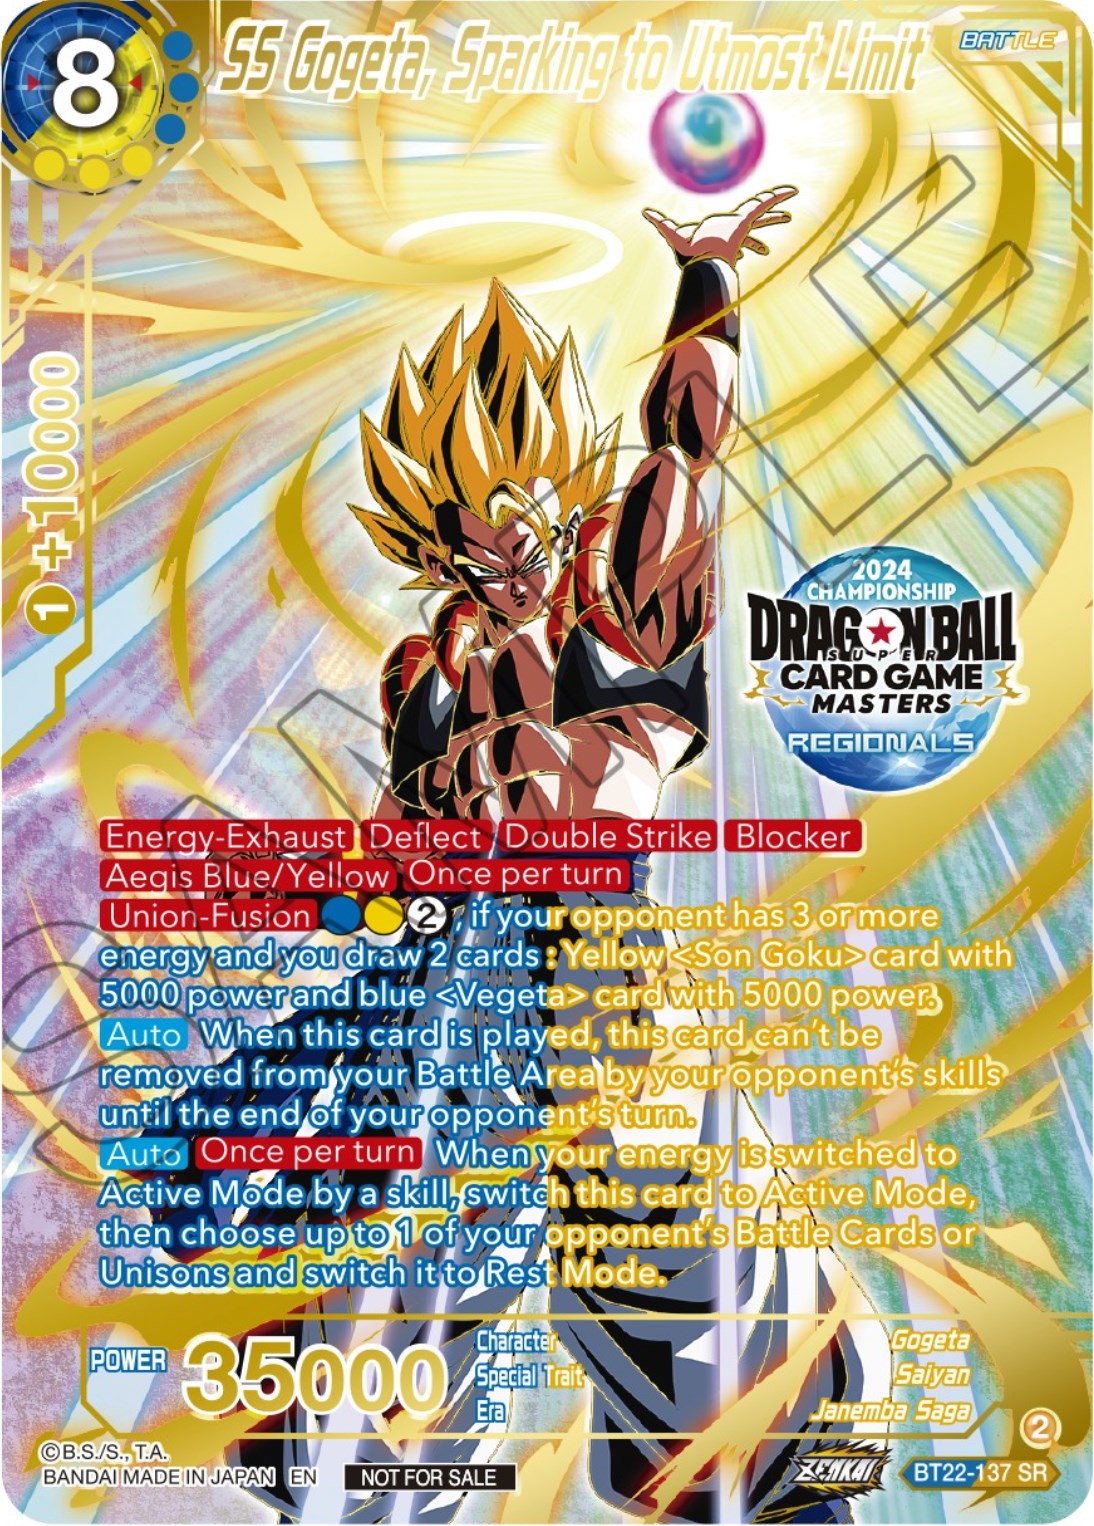 SS Gogeta, Sparking to Utmost Limit (2024 Championship Regionals Top 16) (BT22-137) [Tournament Promotion Cards] | Sanctuary Gaming